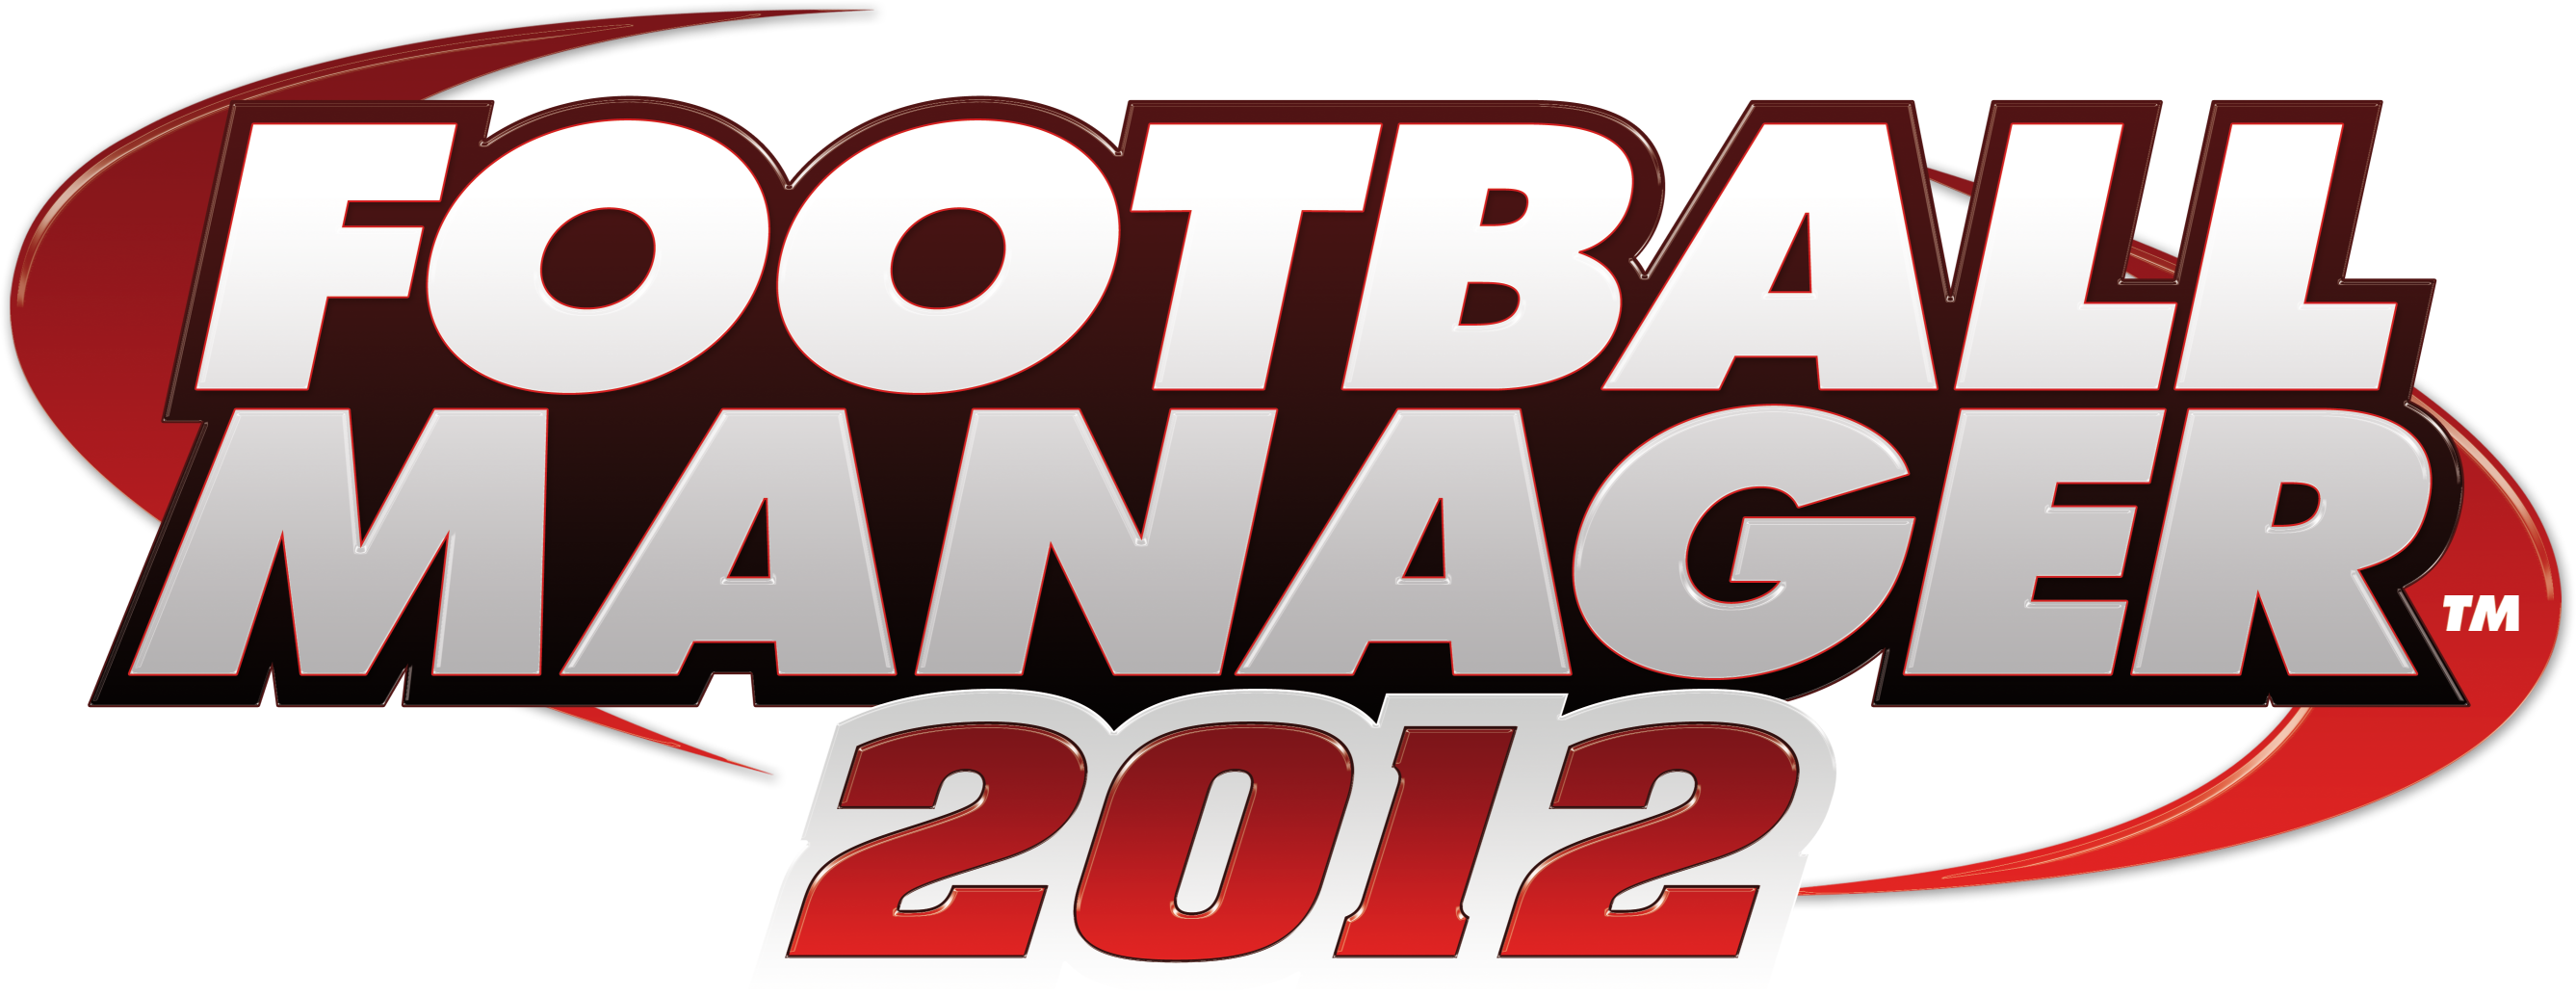 Football manager 2012 steam фото 43